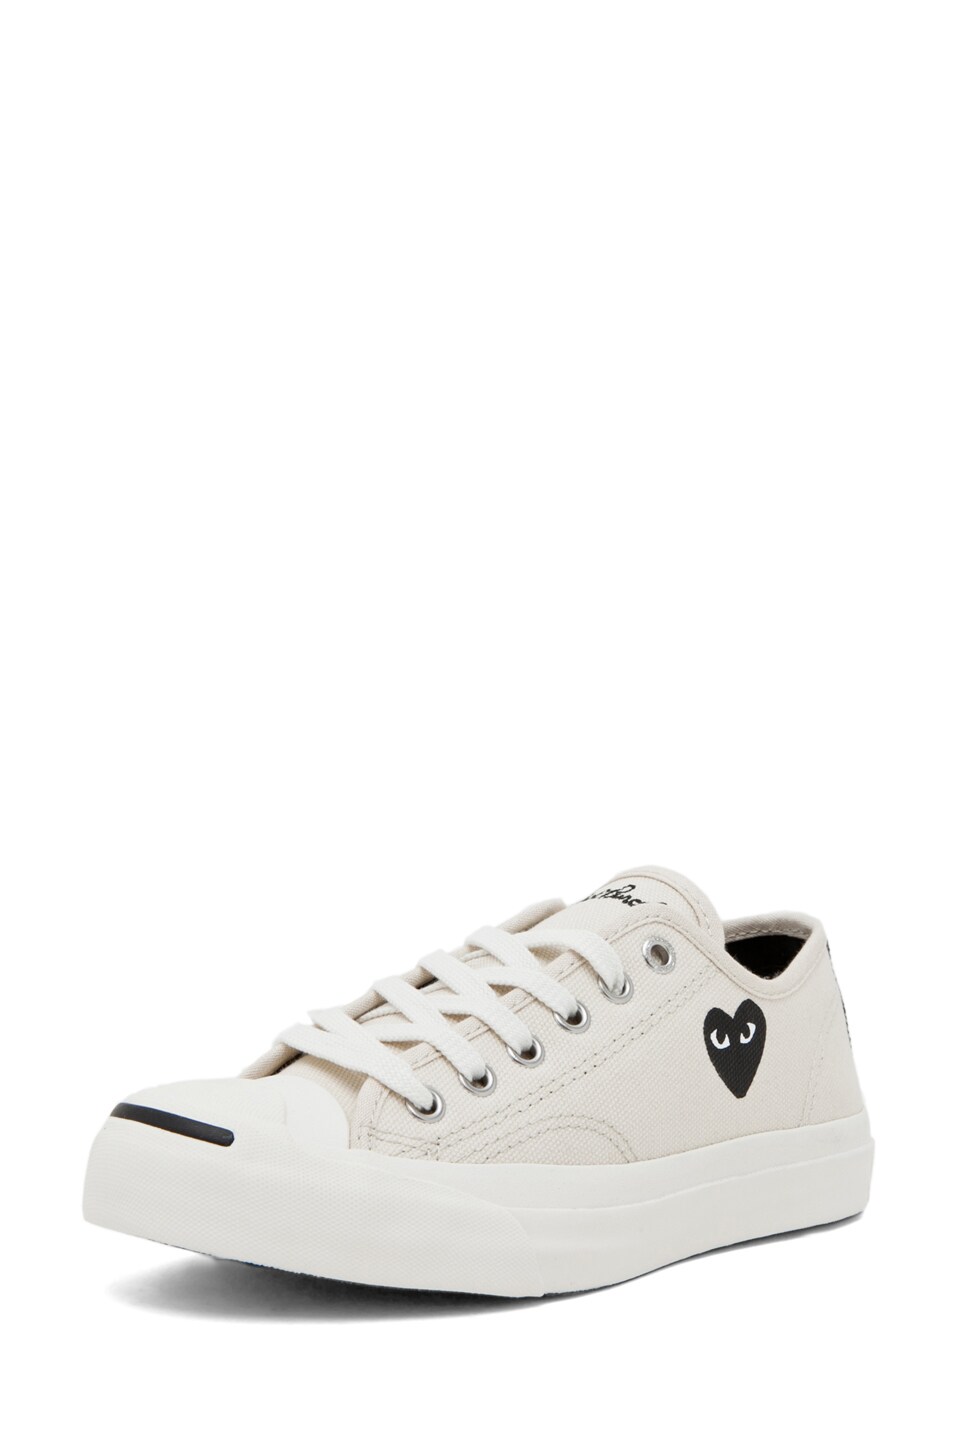 Image 1 of COMME des GARCONS PLAY Converse Jack Purcell Sneaker in White & Black